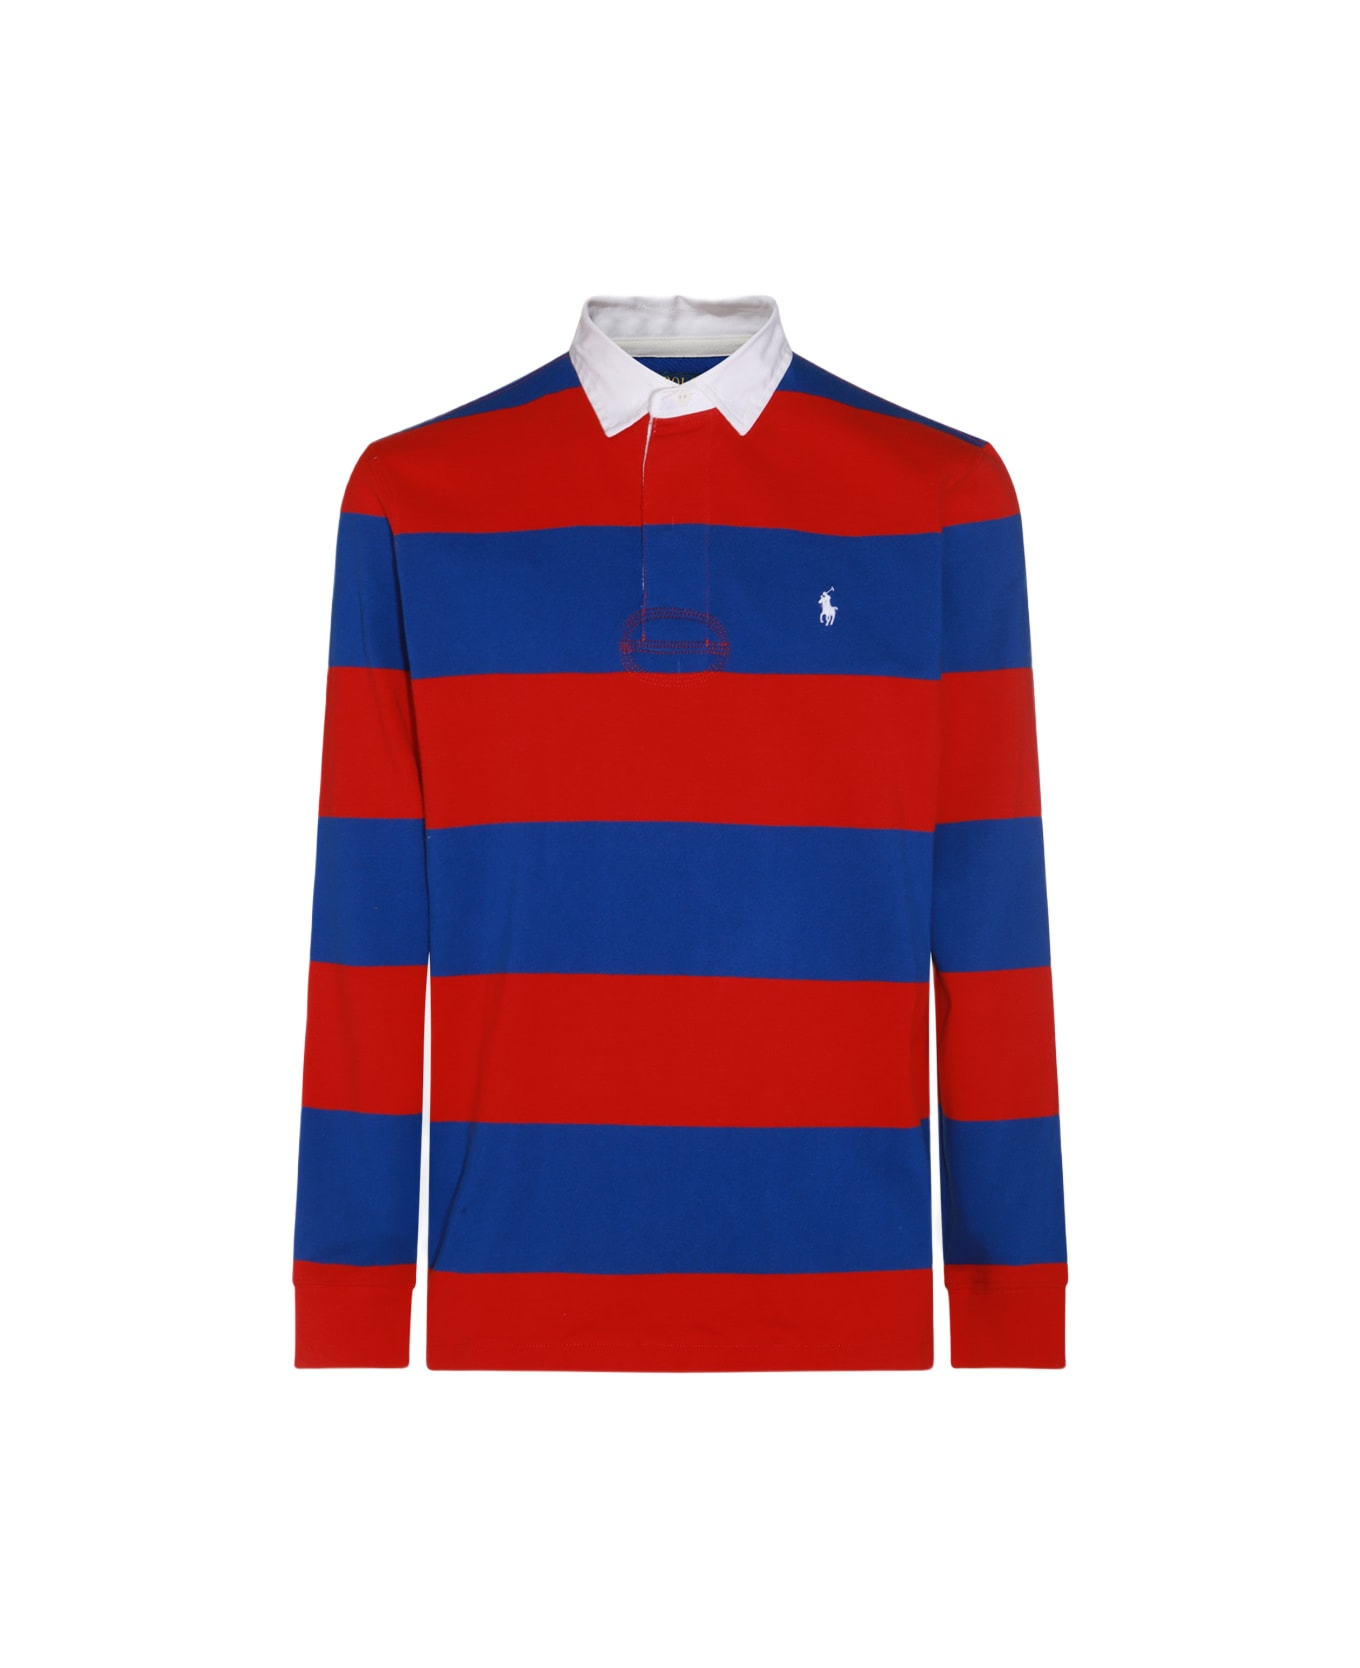 Polo Ralph Lauren Red And Blue Cotton Polo Shirt - RL 2000 RED/RUGBY ROYAL